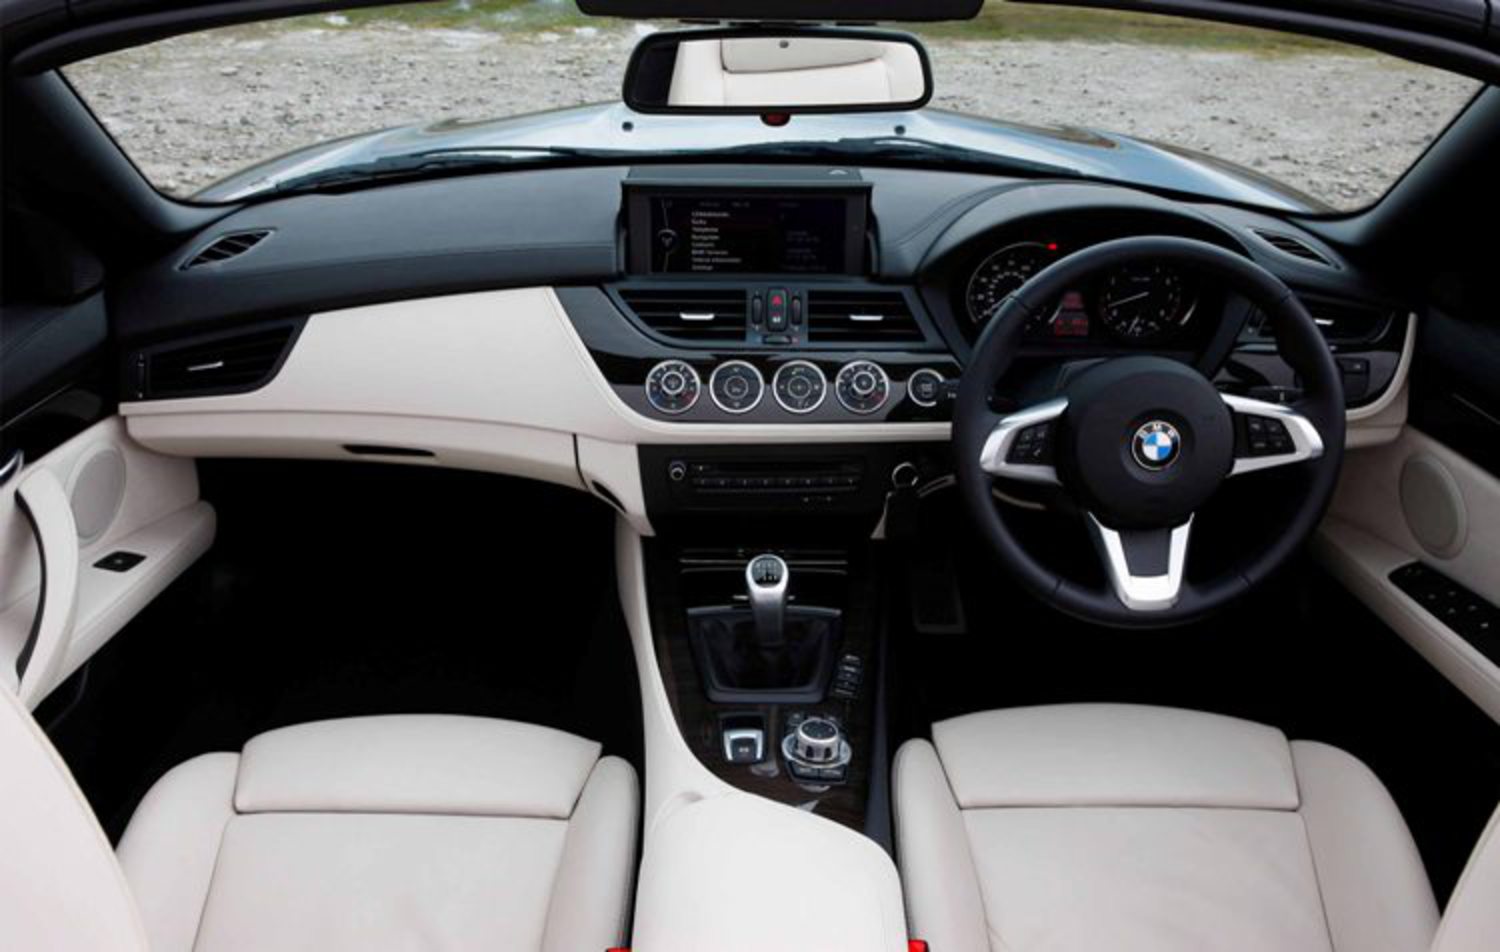 The seats with their integrated headrests come as standard on the BMW Z4